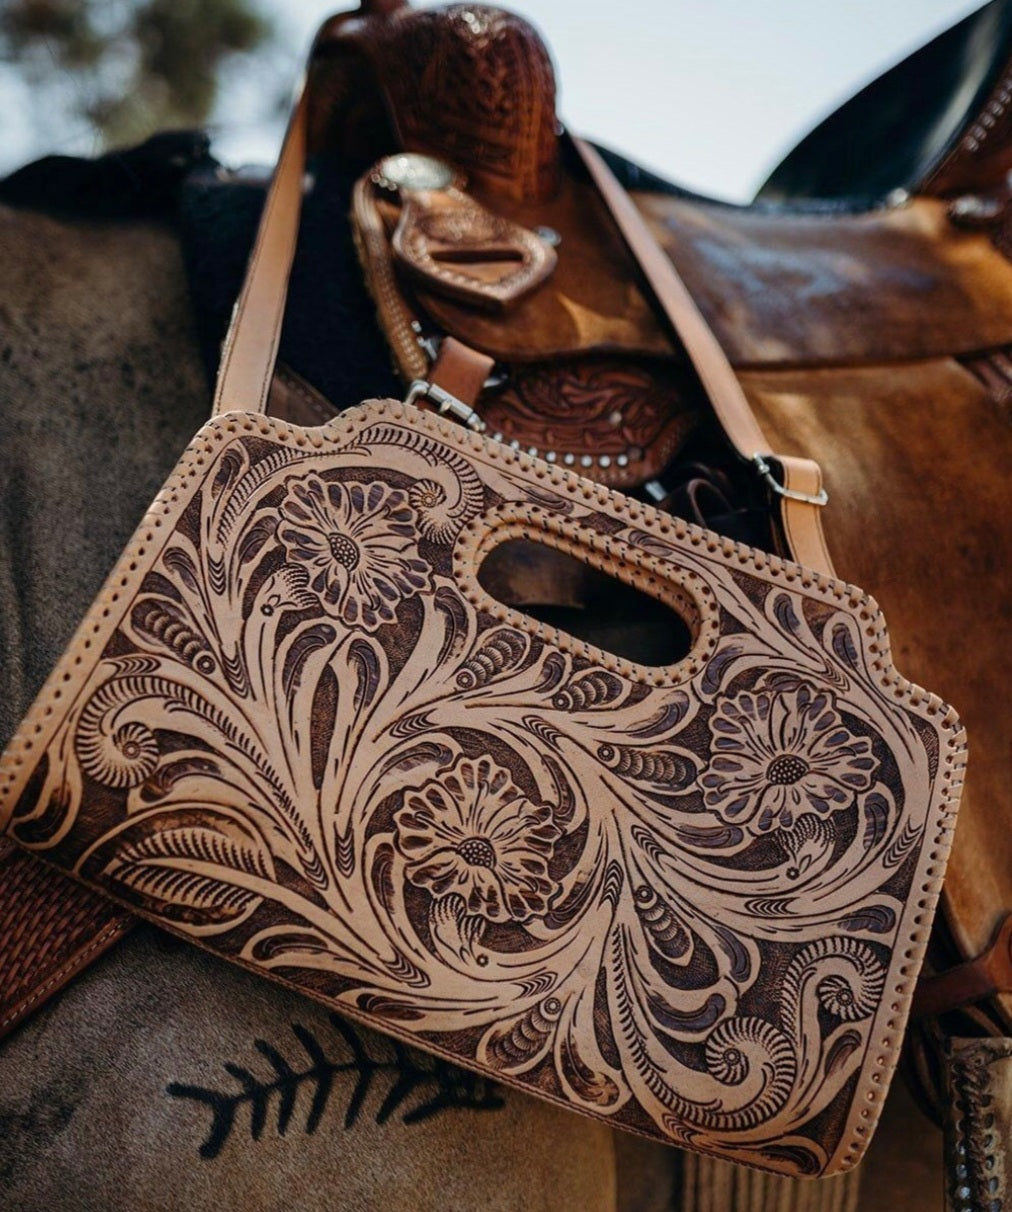 Floral Tooled Leather Clutch - Choice of Colors - clutch, cowgirl, gift, handbag, leather, made in the usa, madeintheusa, MADEINUSA, Printed in USA, purse, southwestern, tooled, turquoise, usa, usa artisan, usa artist, usa made, usaartisan, usaartist, USAMADE, western -  - Baha Ranch Western Wear